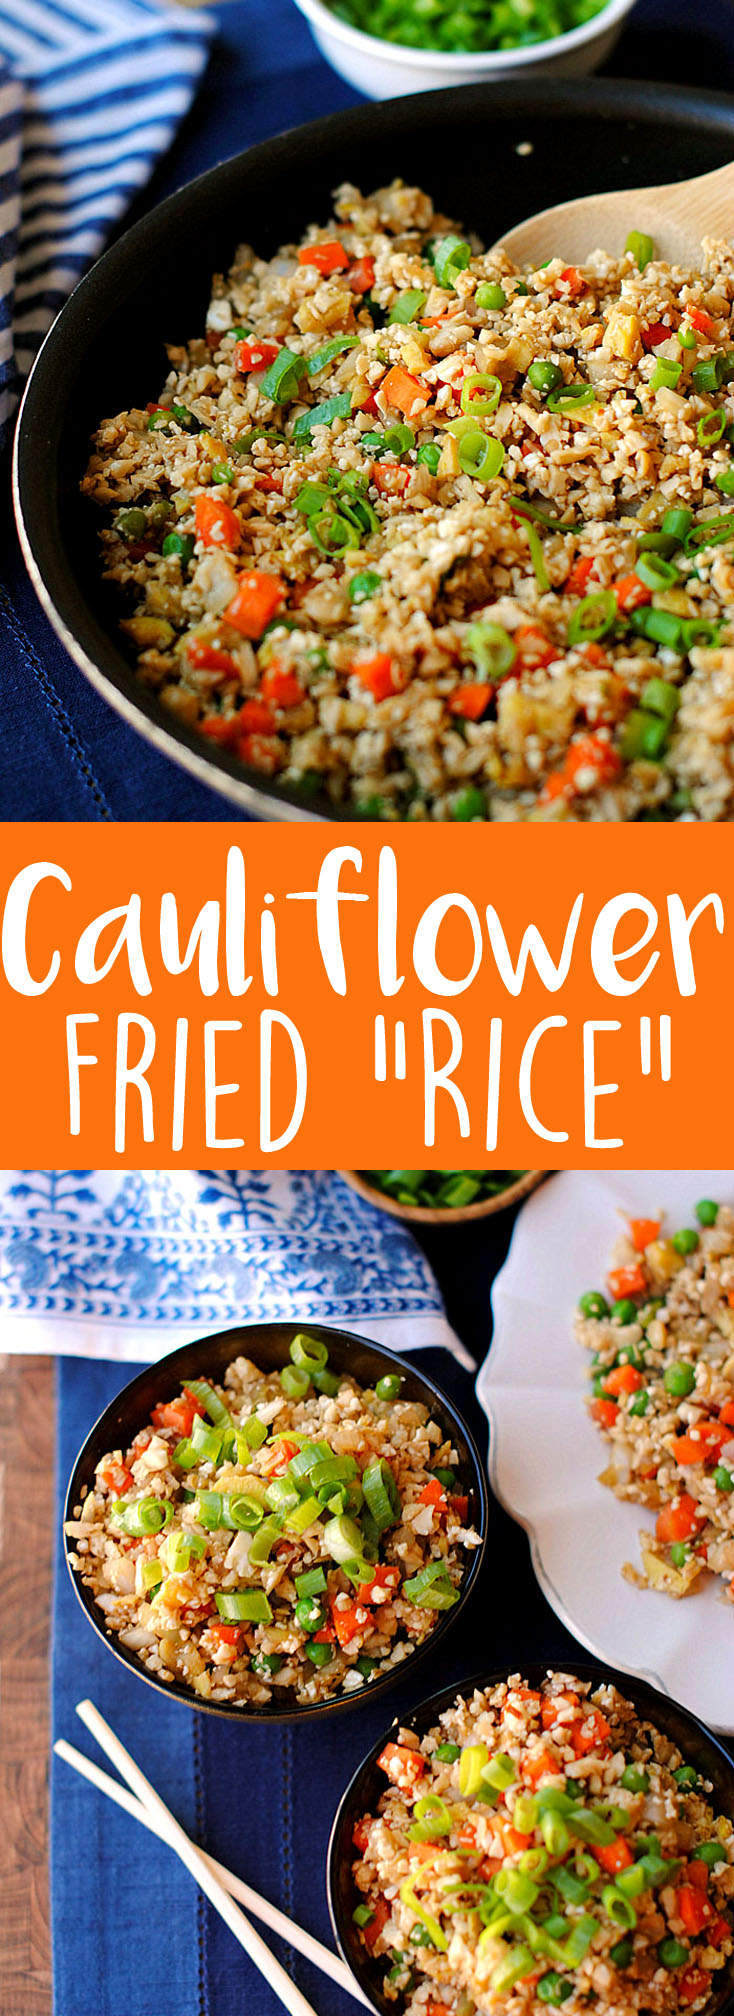 {Healthy} Cauliflower Fried Rice  <div><h2>Healthy Cauliflower Fried Rice</h2><div><p>Jump to Recipe</p><p><em>This Healthy Cauliflower Fried Rice tastes just as delicious as your typical take-out favorite, but without all the calories and carbs!  This dish is packed with veggies and easily made in just 15 minutes!</em></p><p><img src=